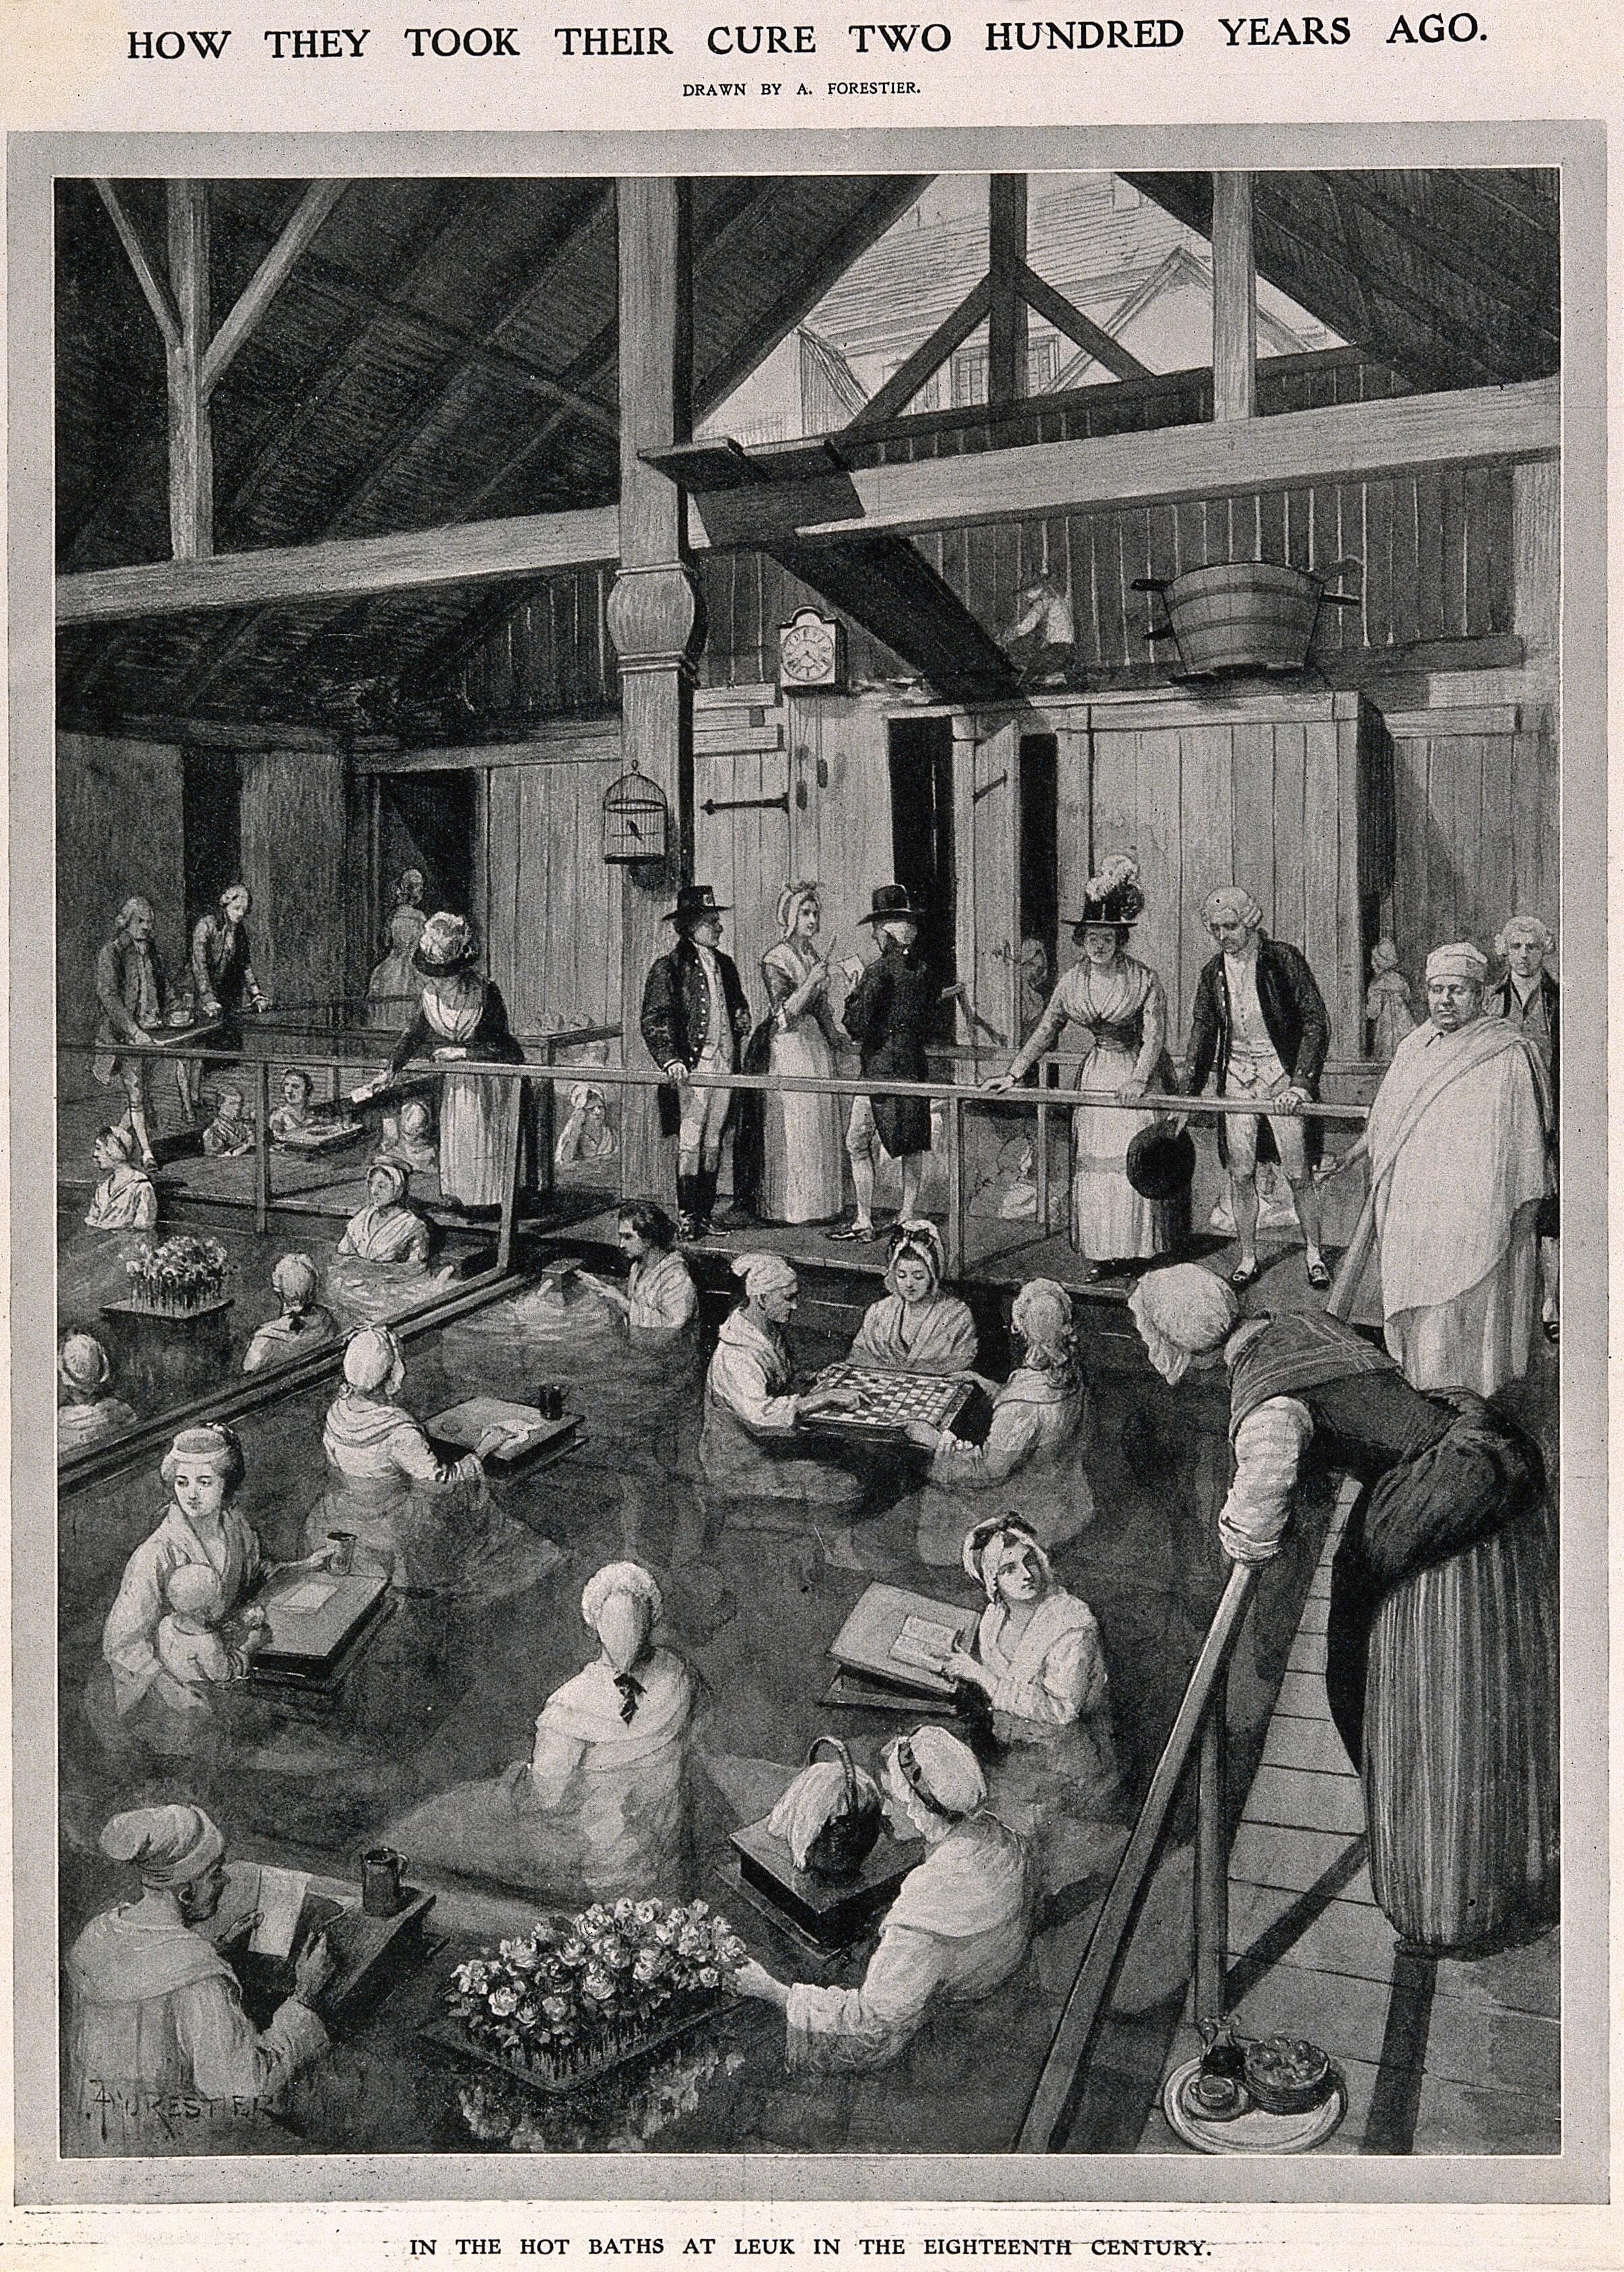 Patients bathing in the hot baths at Leuk, Switzerland, in the 1700s.